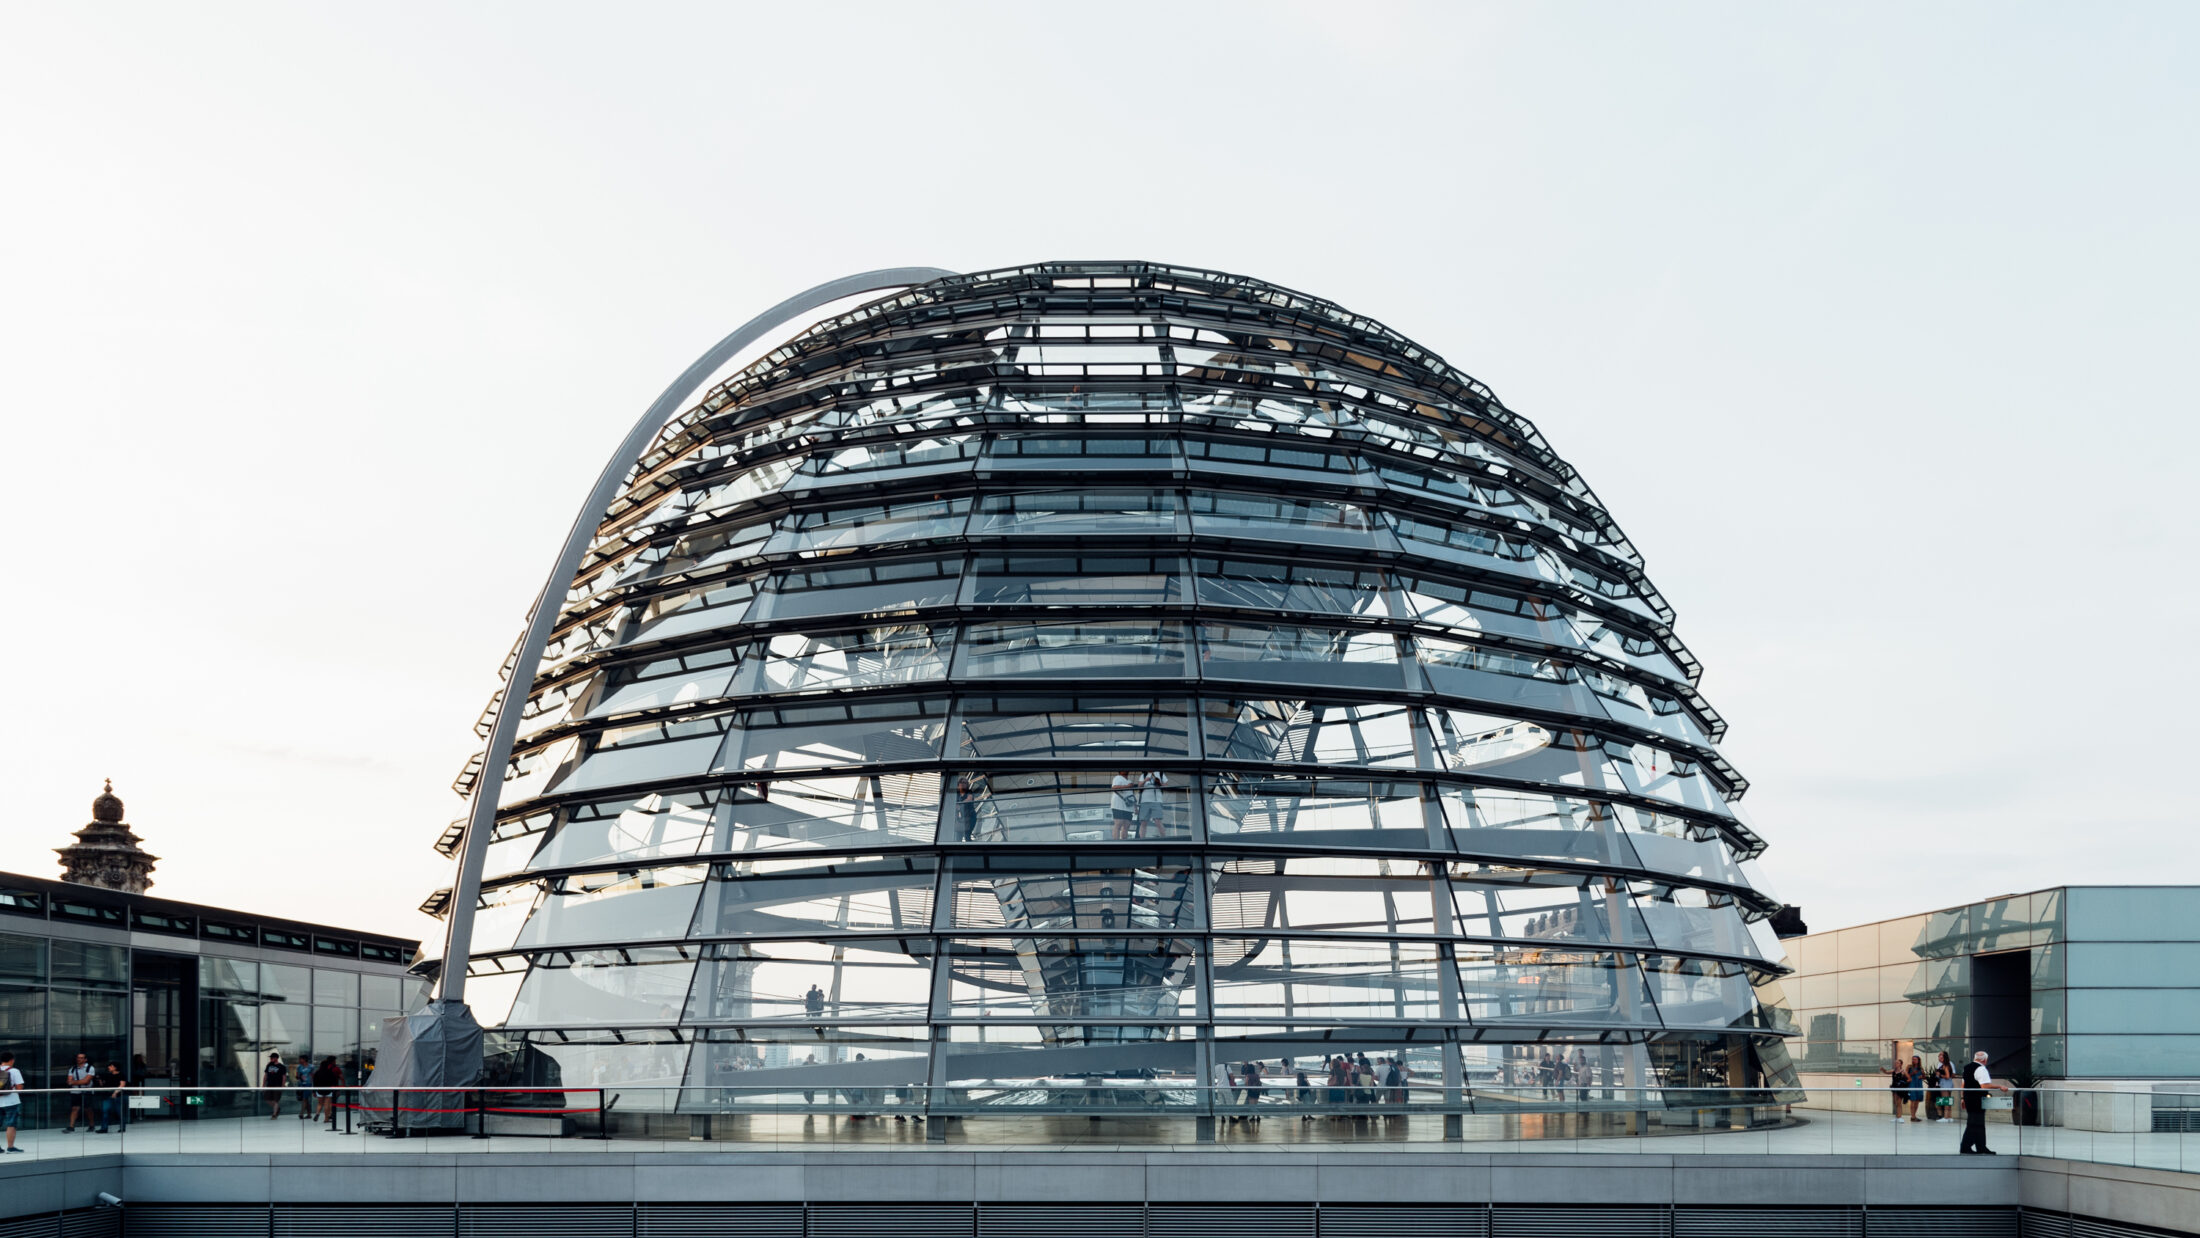 View of the dome of reichstag building in berlin seat of the german parliament deutscher bundestag t20 v L3 K96